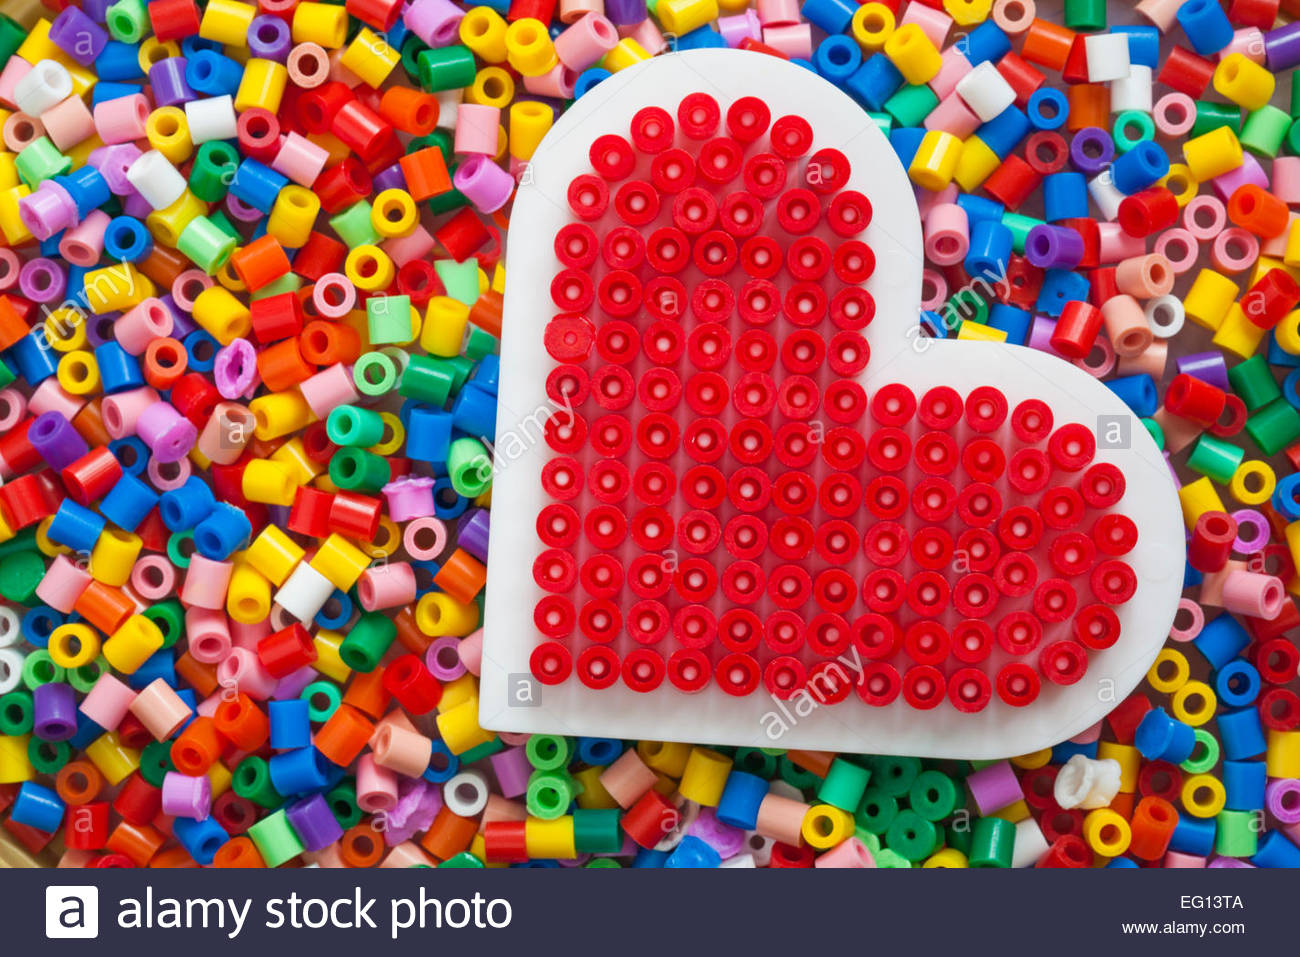 Beads And Red Heart Stock Photos & Beads And Red Heart Stock Throughout Hama Bead Letter Templates